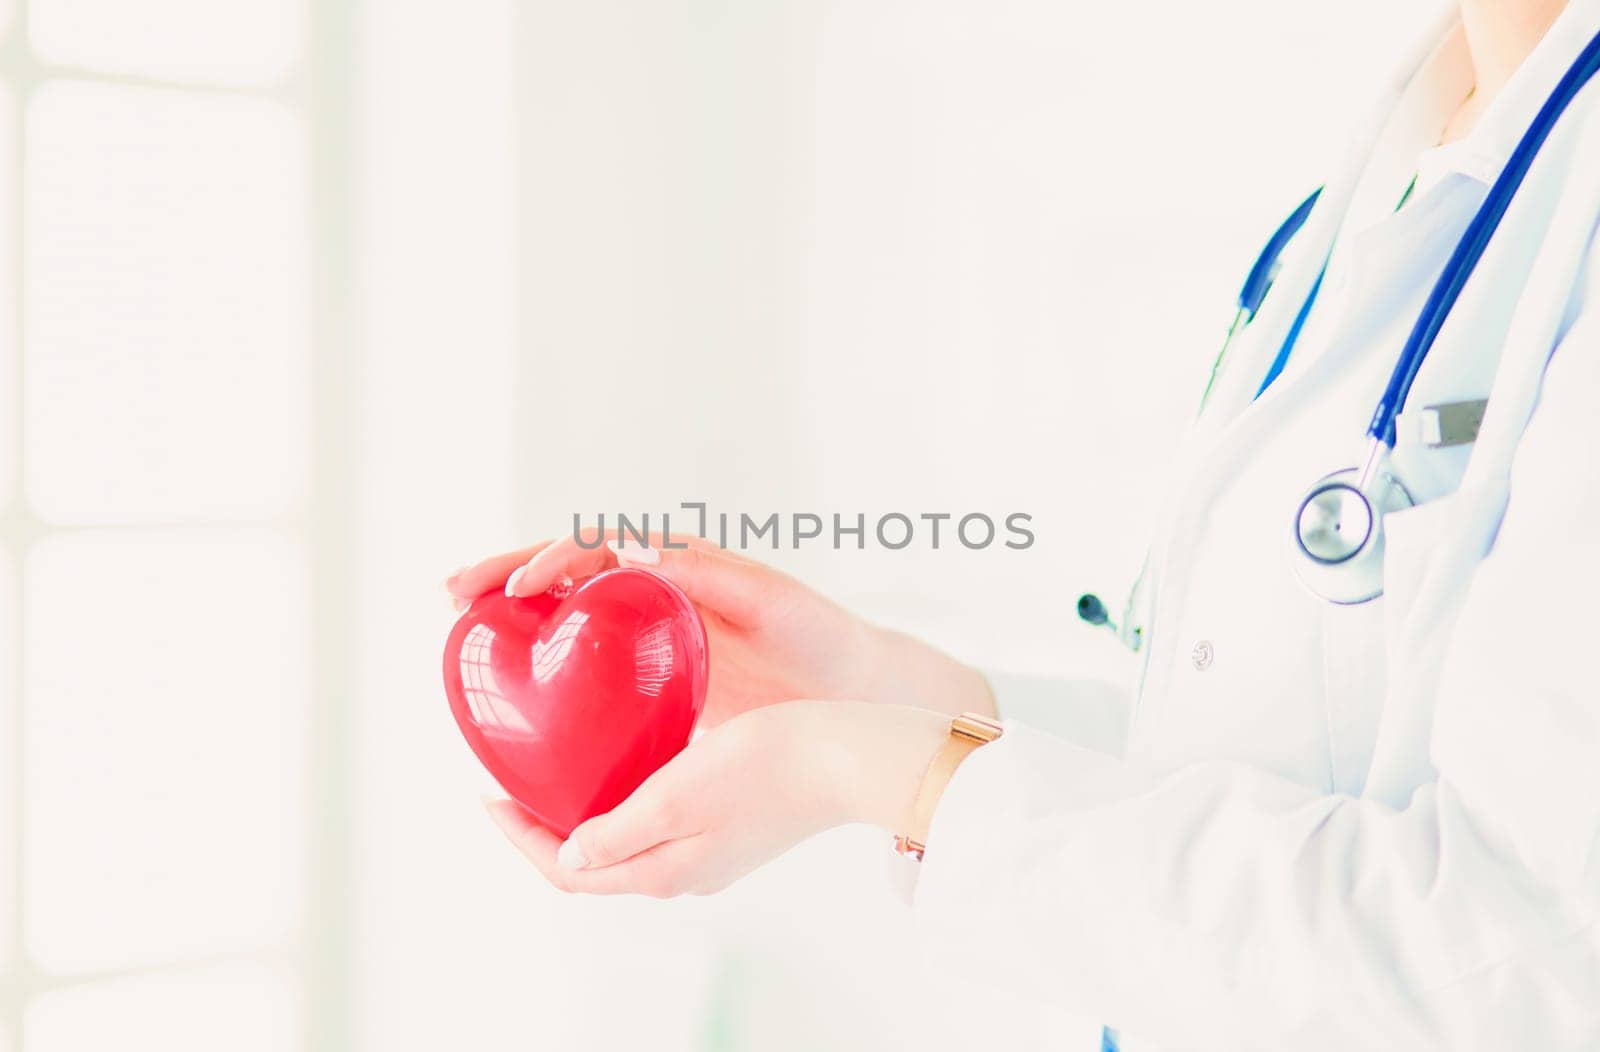 Female doctor with stethoscope holding heart, on light background.